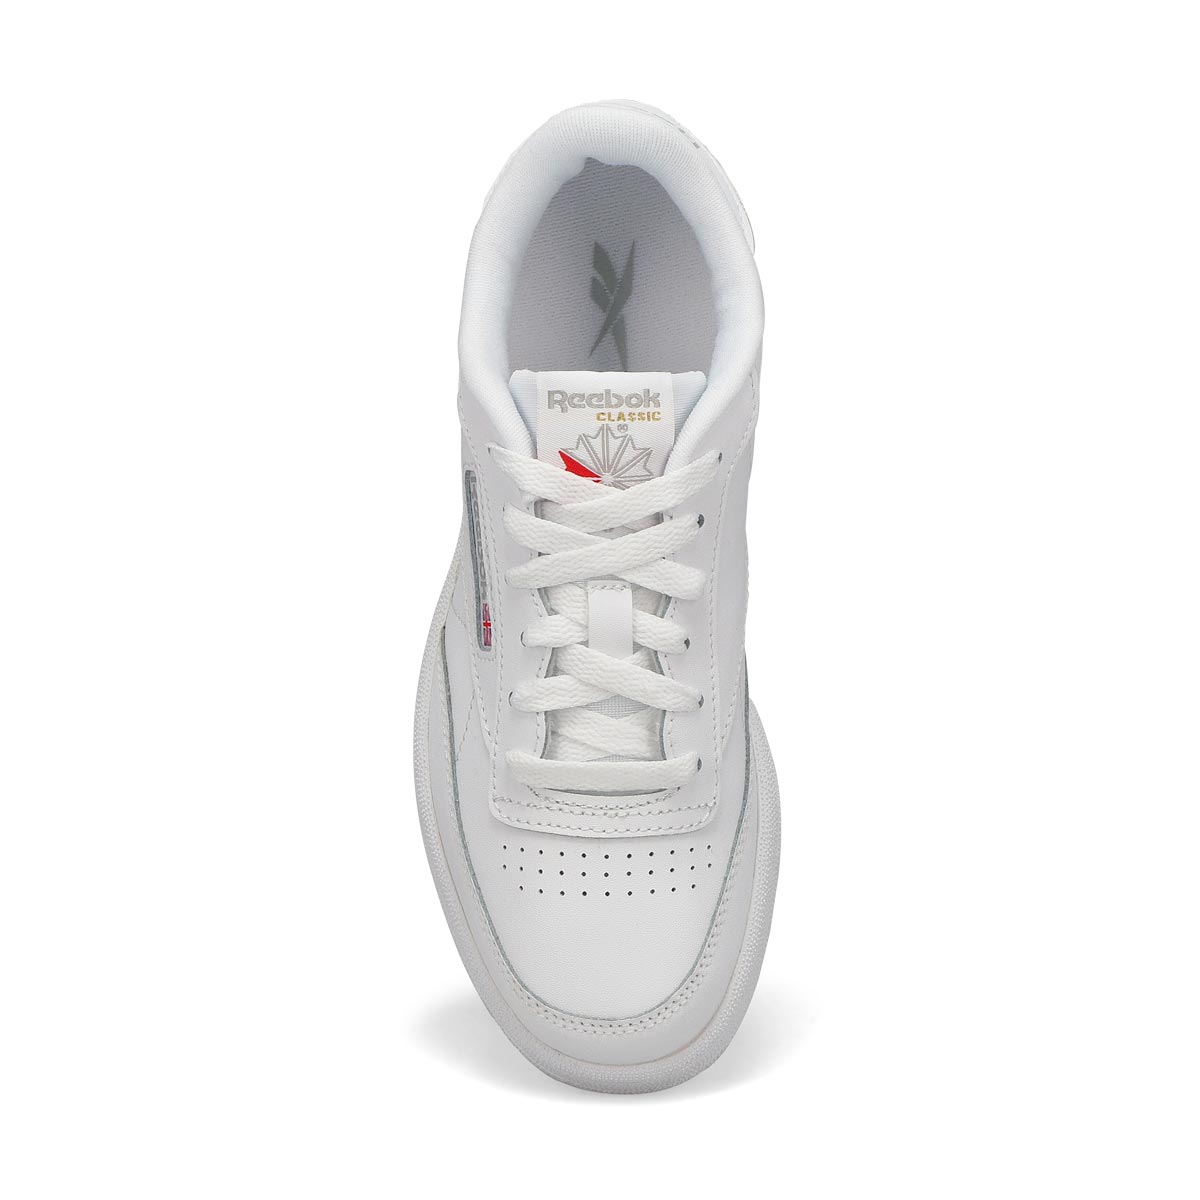 Kids Club C Lace Up Sneaker - White